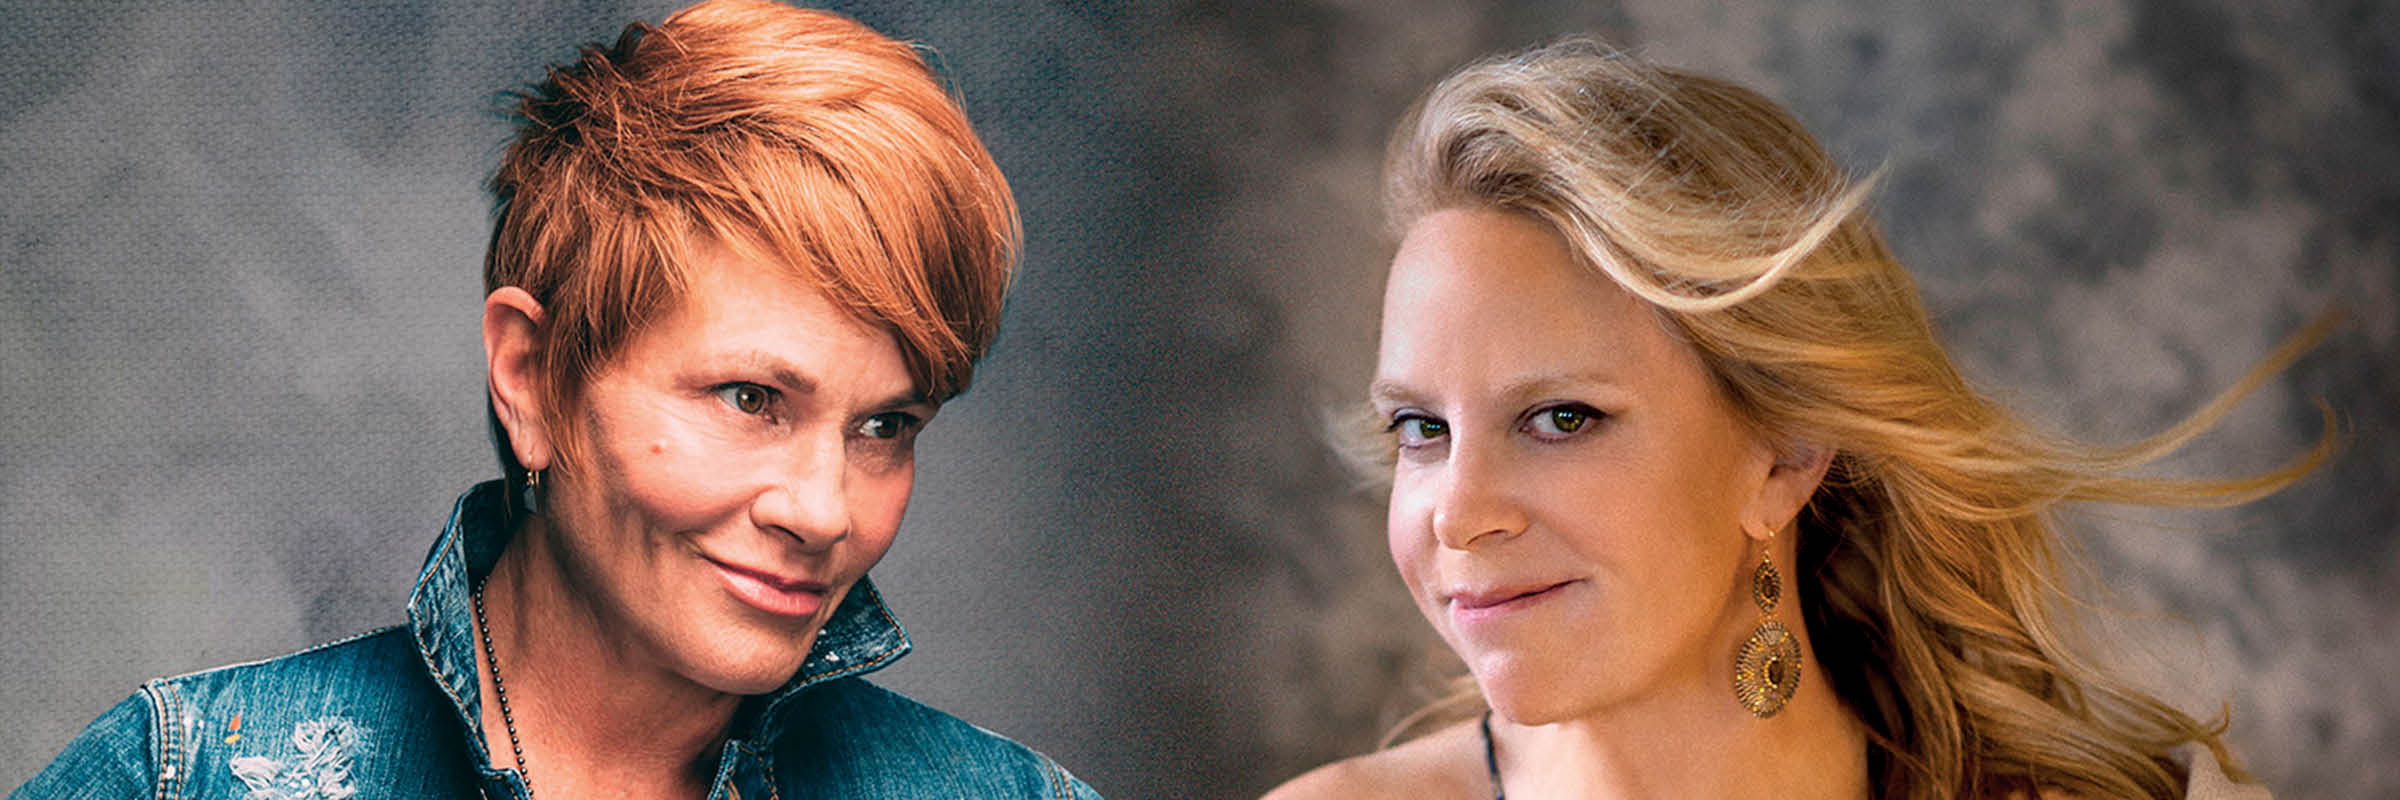 Mary Chapin Carpenter & Shawn Colvin Together on Stage!